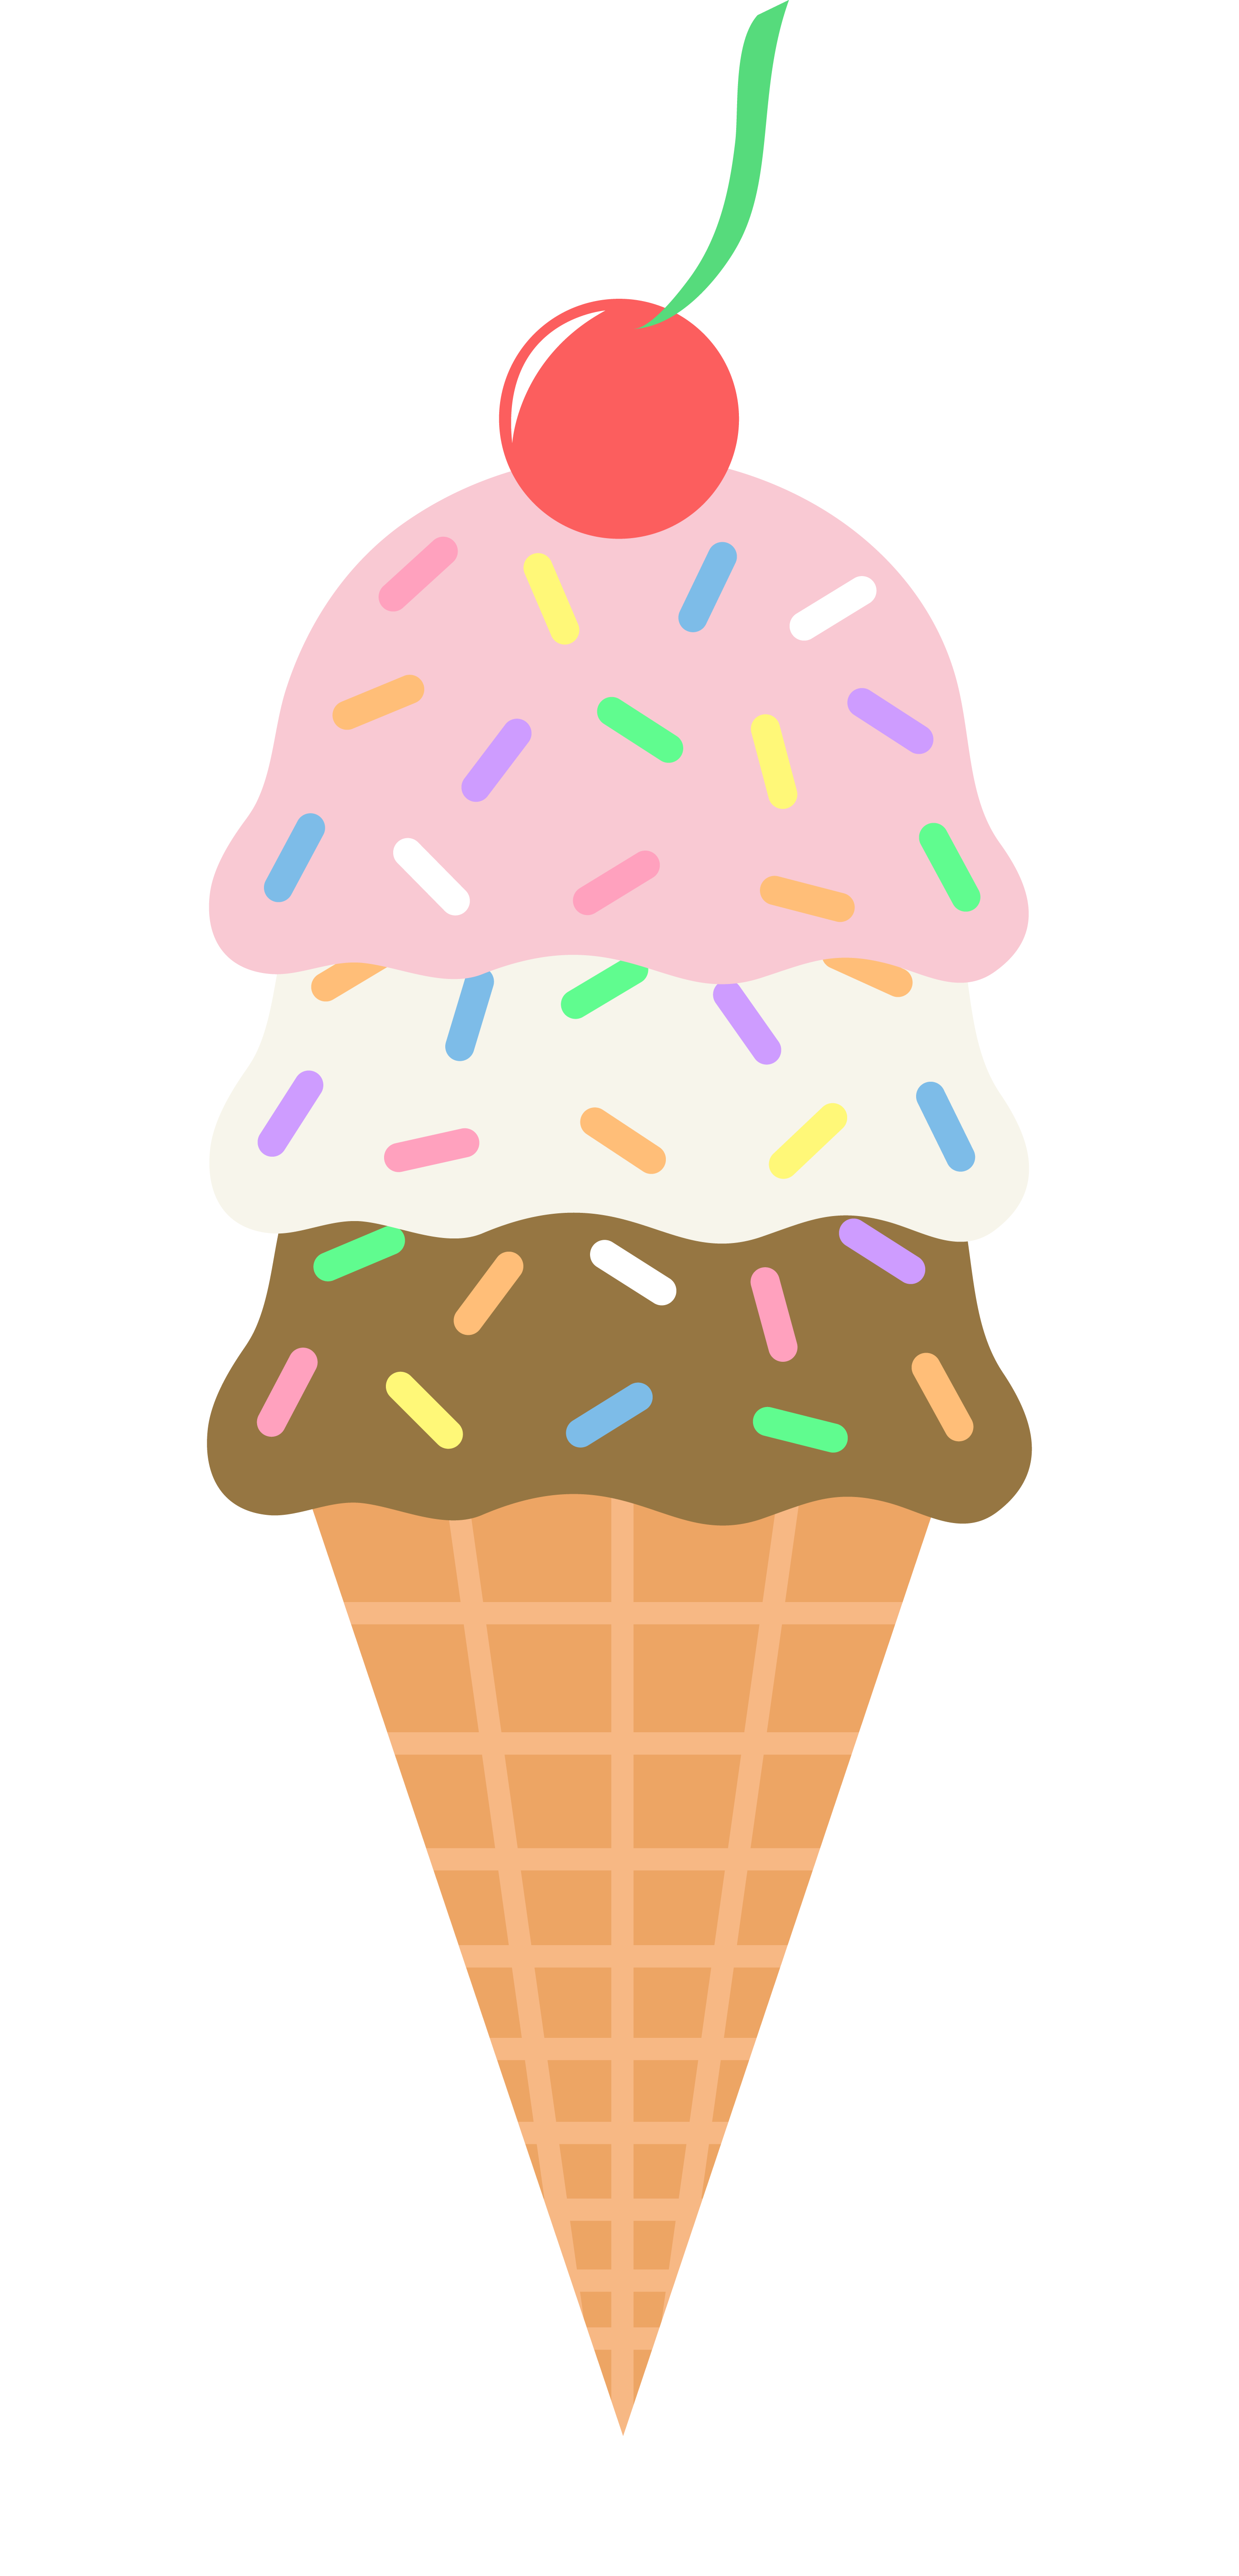     Cone With Sprinkles Clipart   Clipart Panda   Free Clipart Images